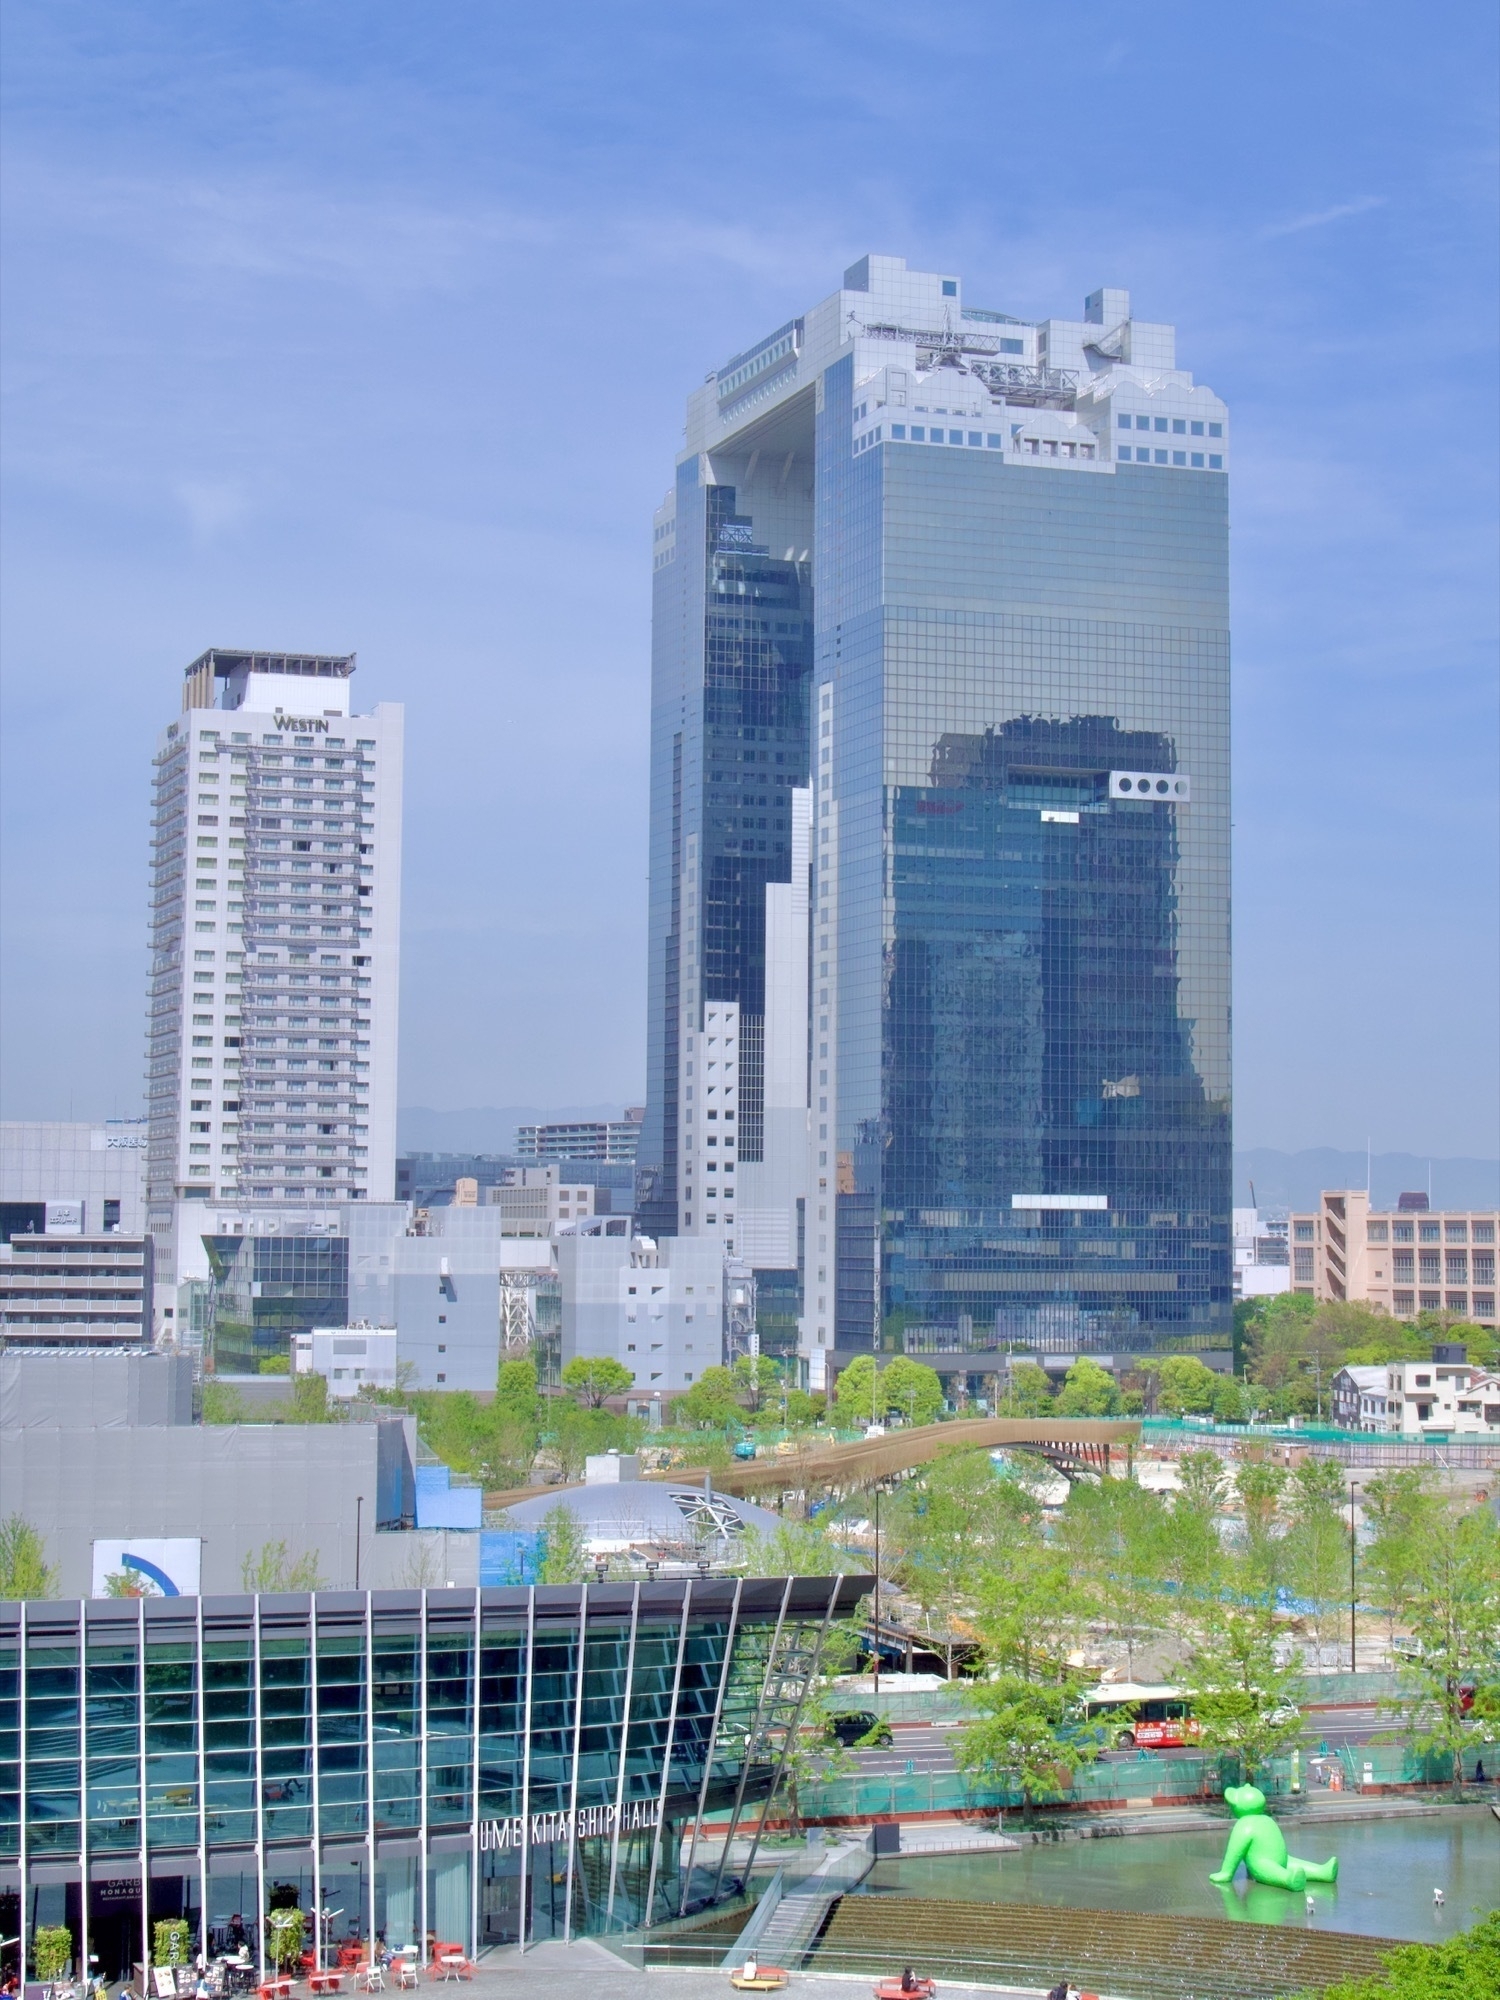 Umeda Sky Building from a distance